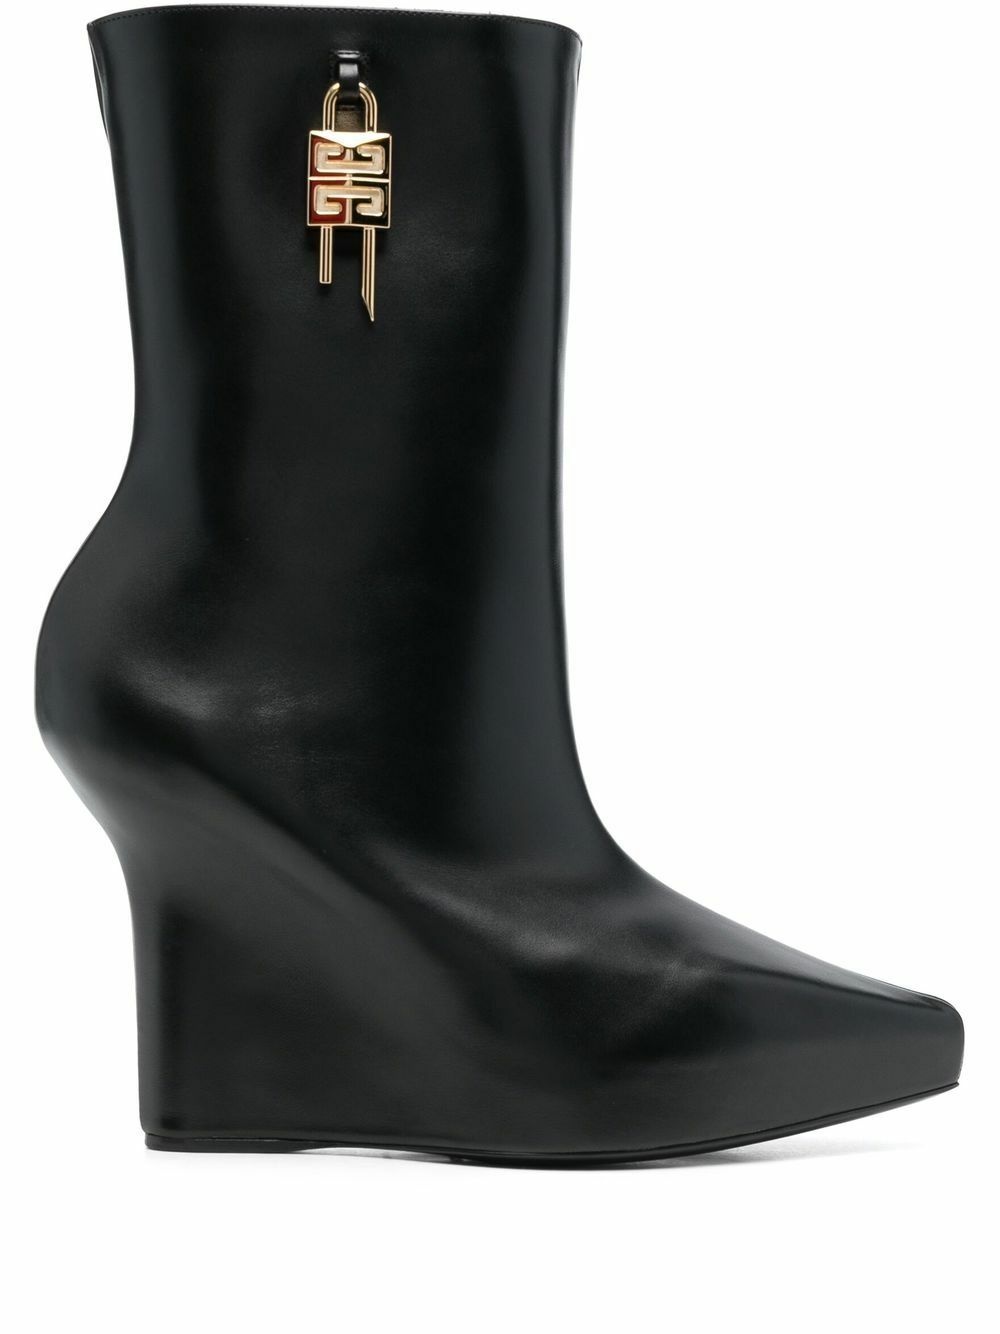 GIVENCHY - G Lock Leather Boots Givenchy